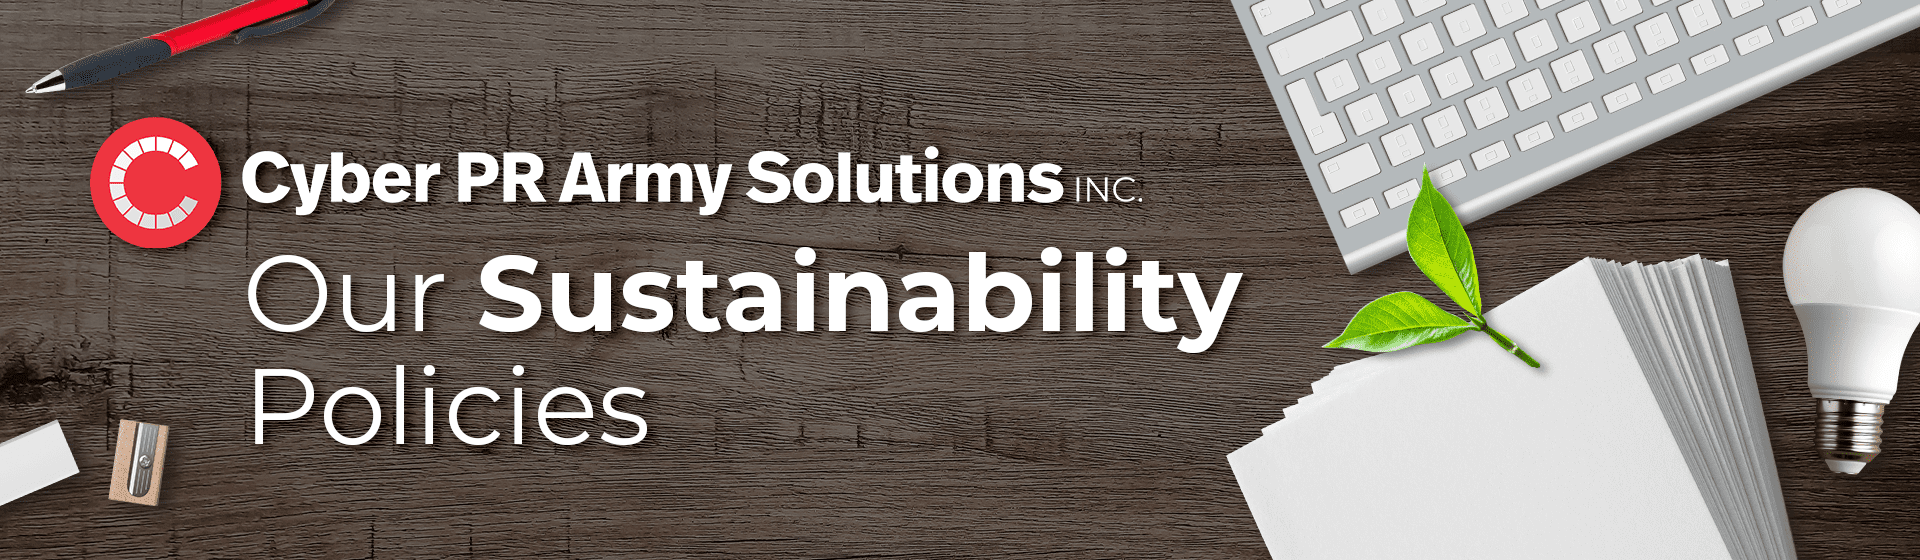 Header for "Our Sustainability Policies"